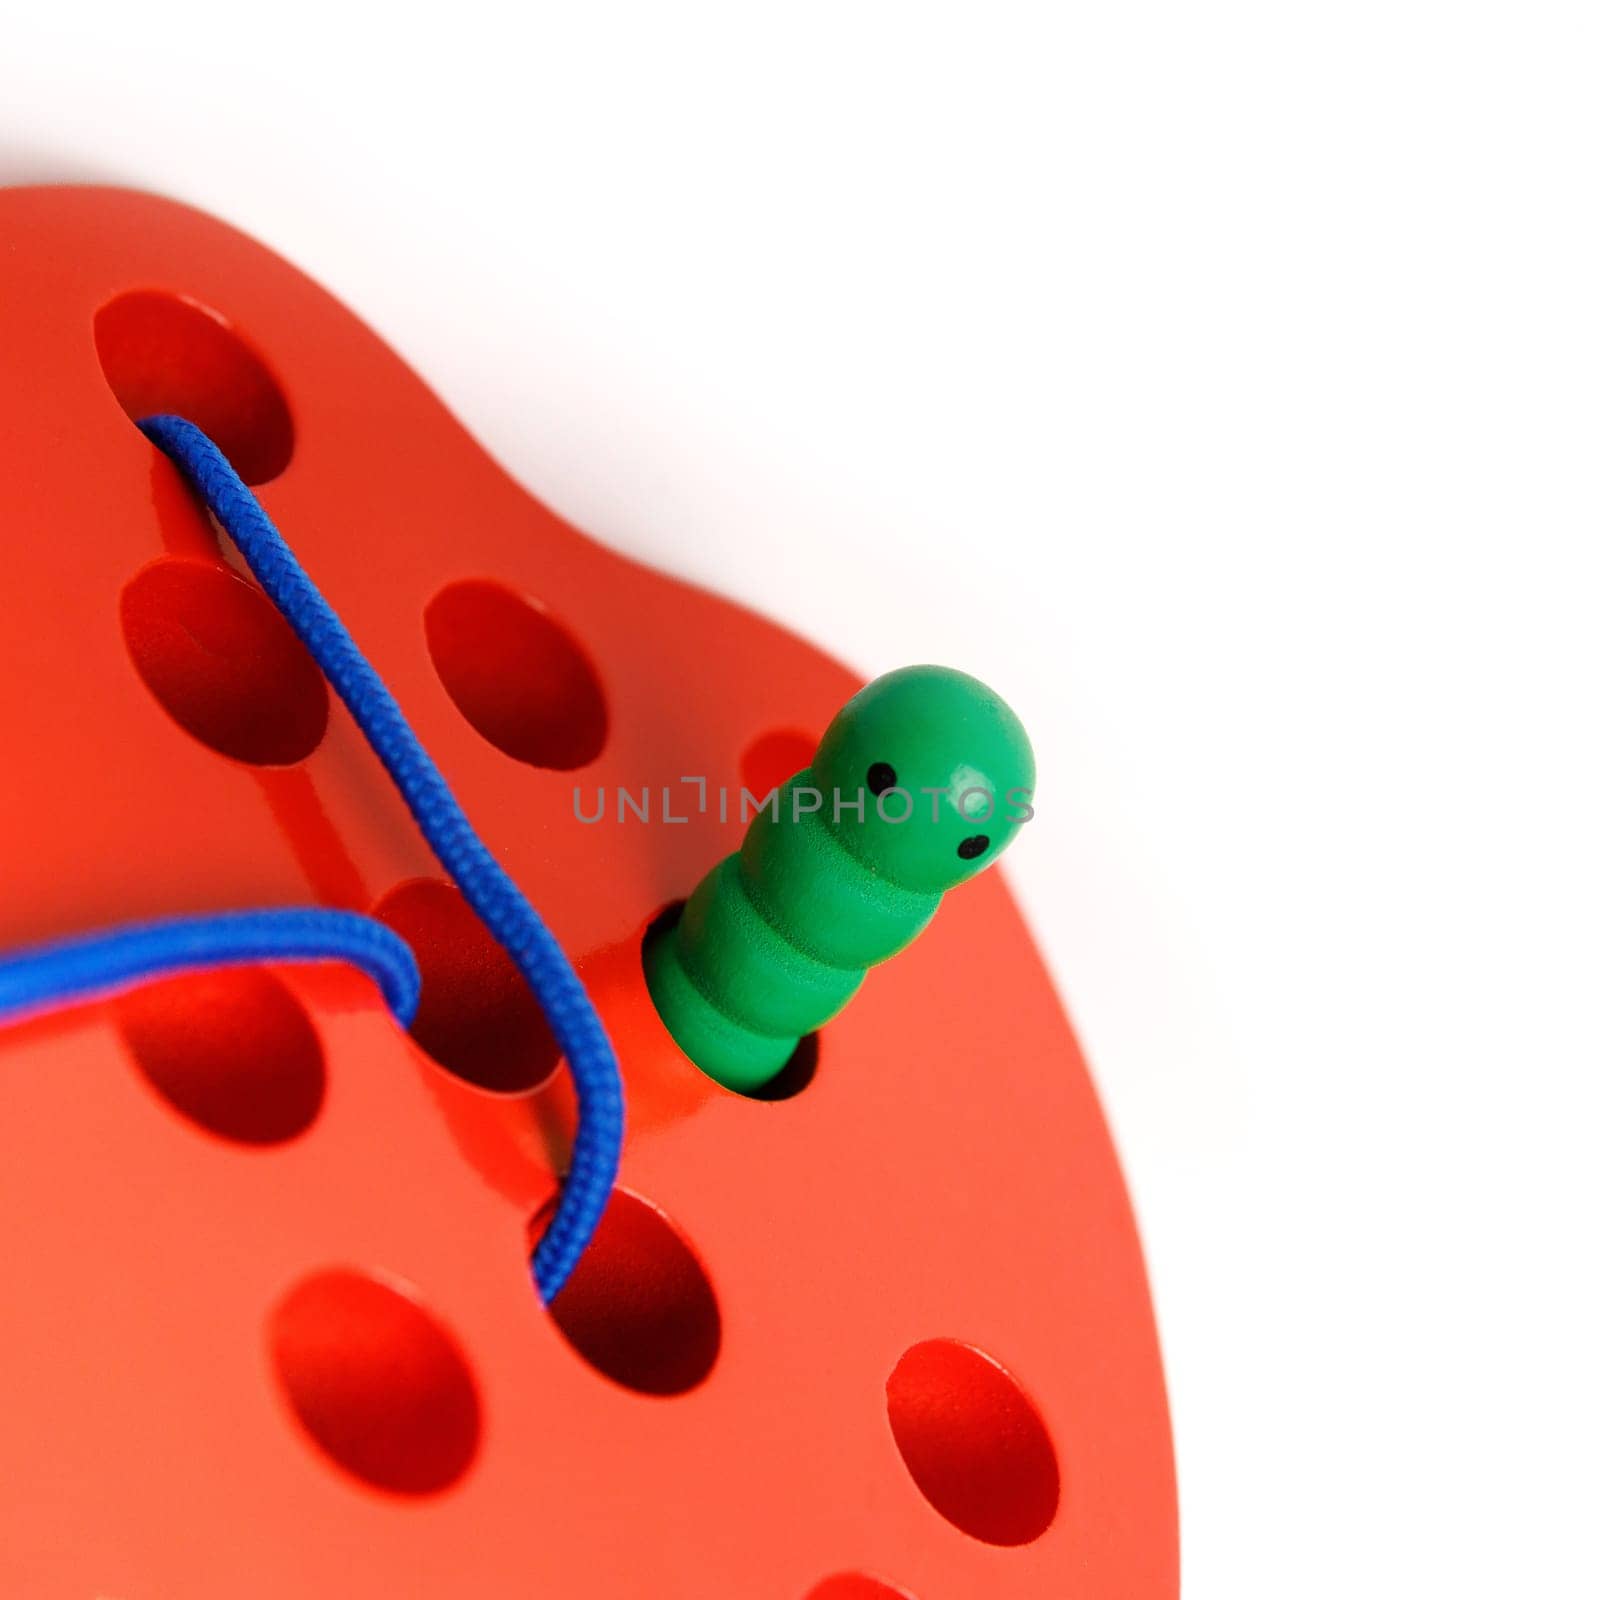 Kid's wooden toy in the shape of a red apple with a funny worm on a rope, toy for developing fine hand motor skills, copy space.